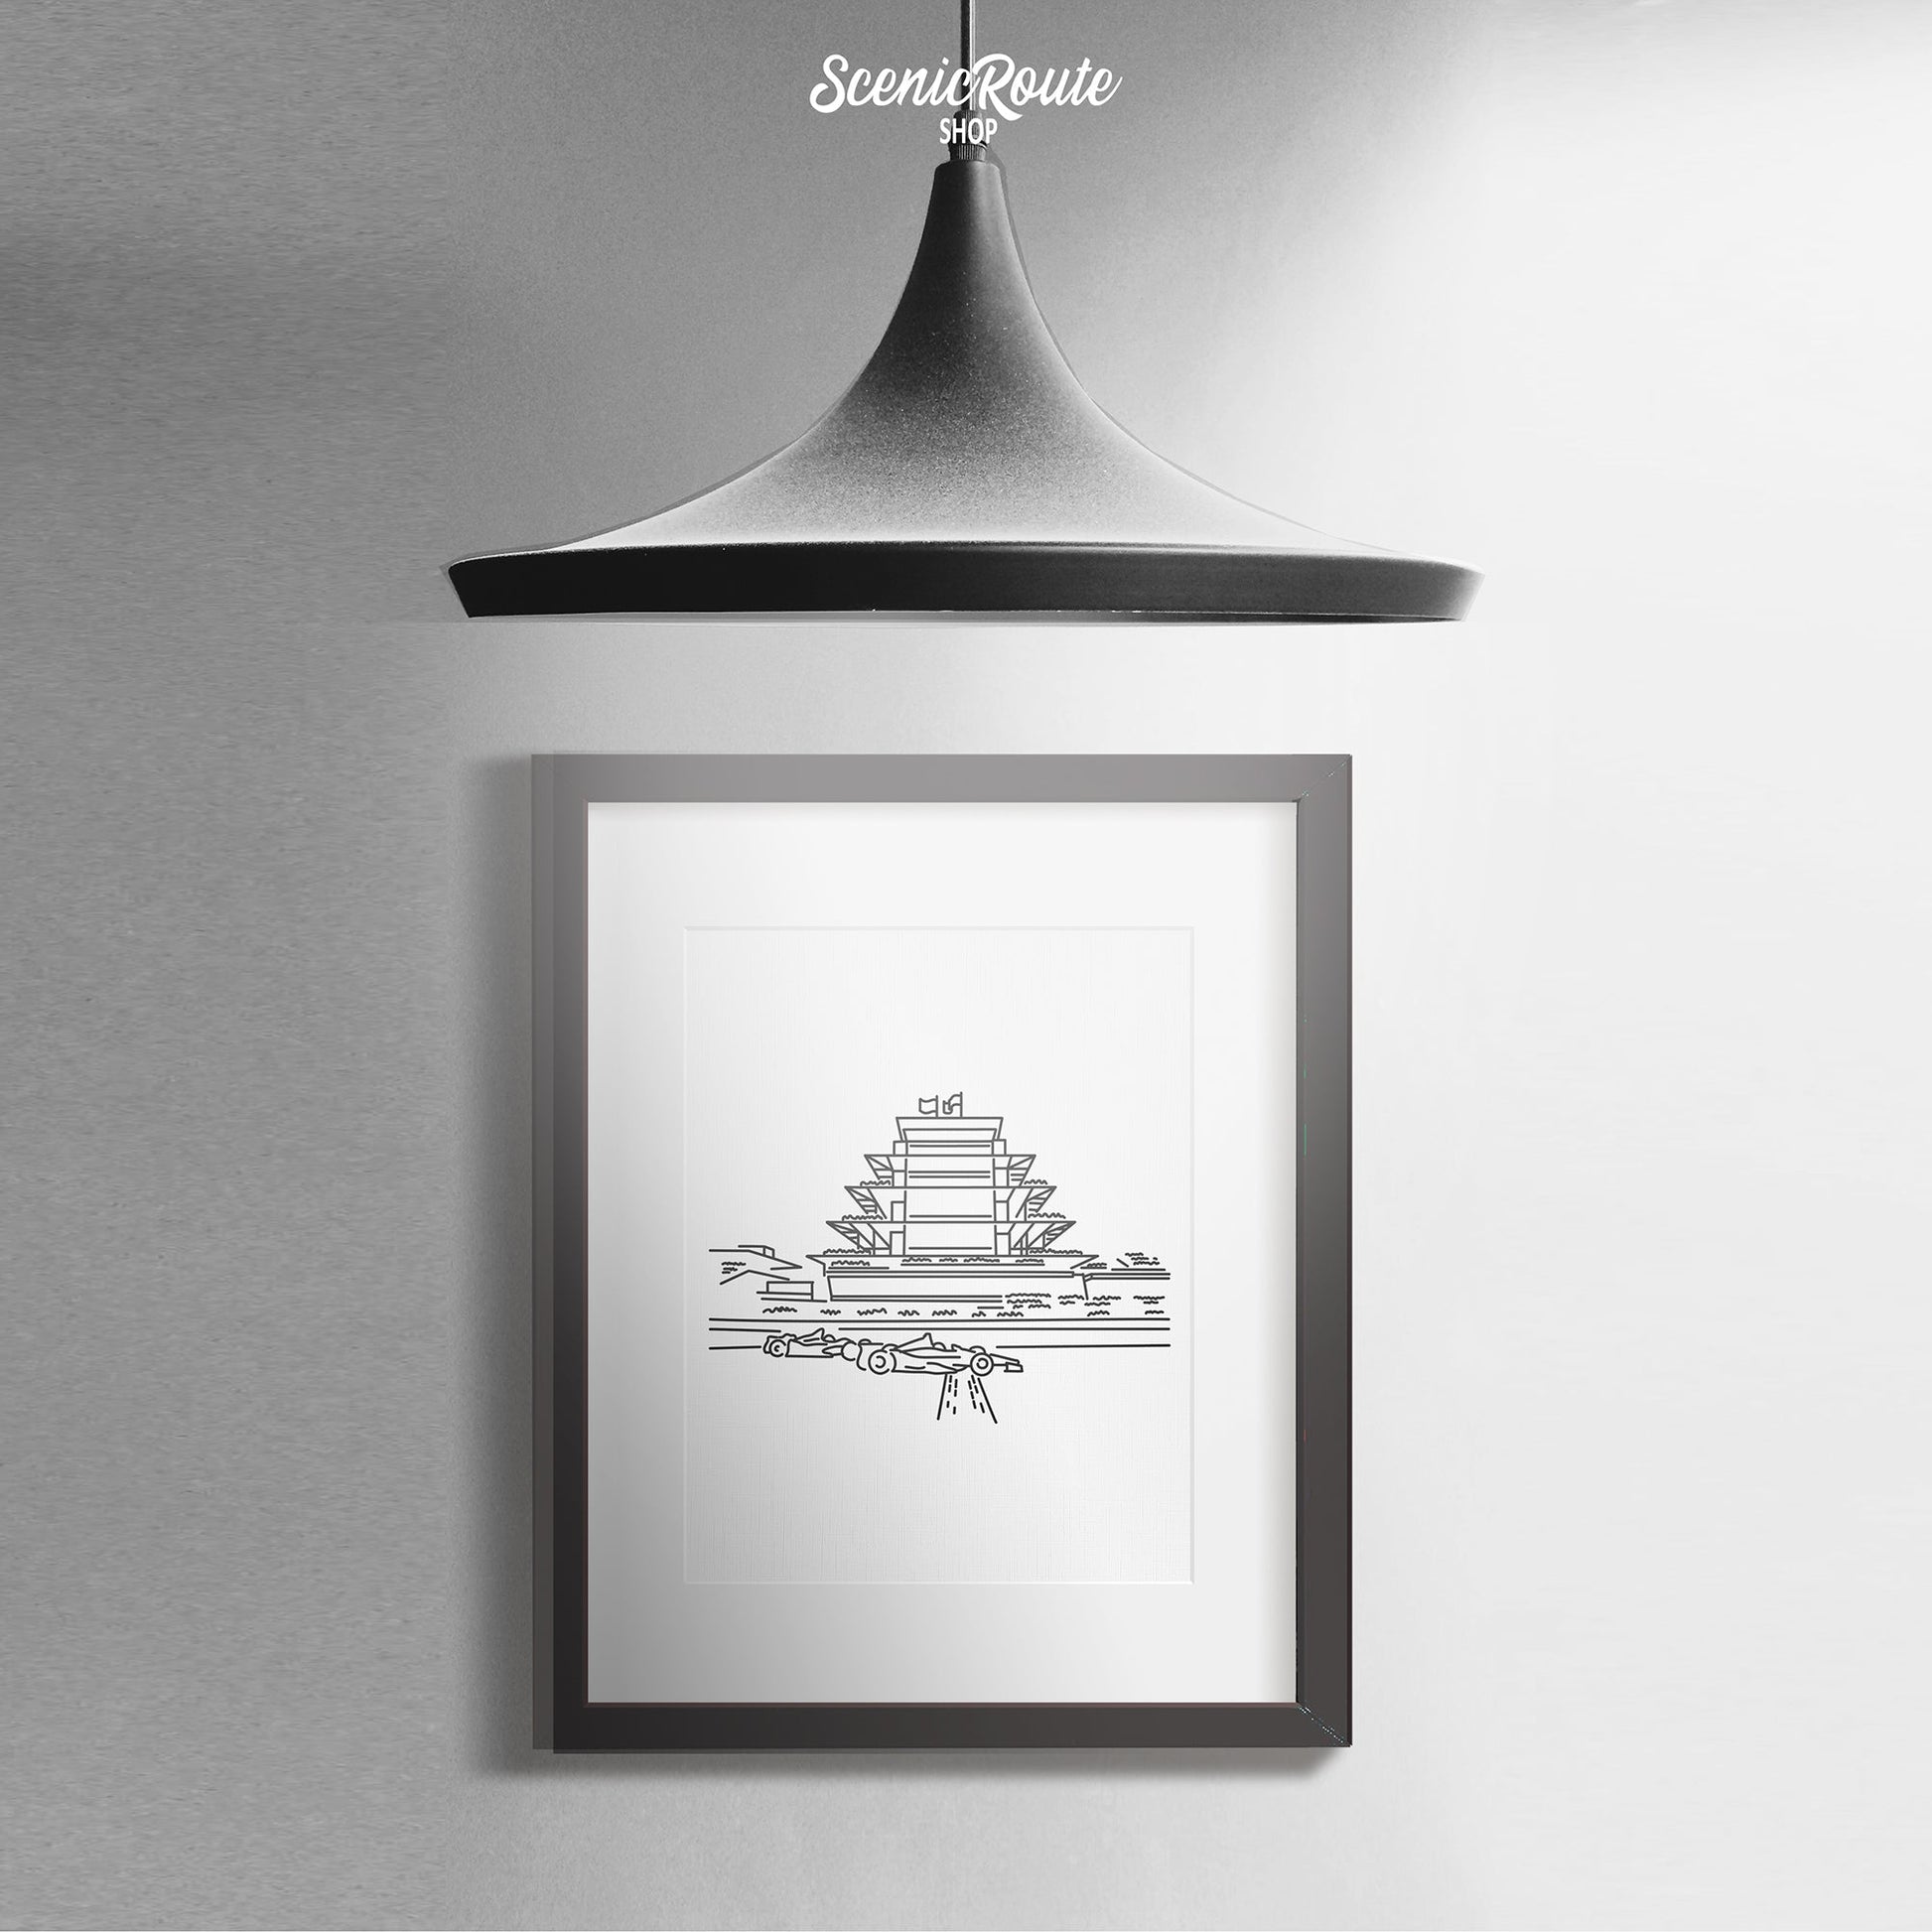 A framed line art drawing of the Speedway Pagoda with a hanging pendant light